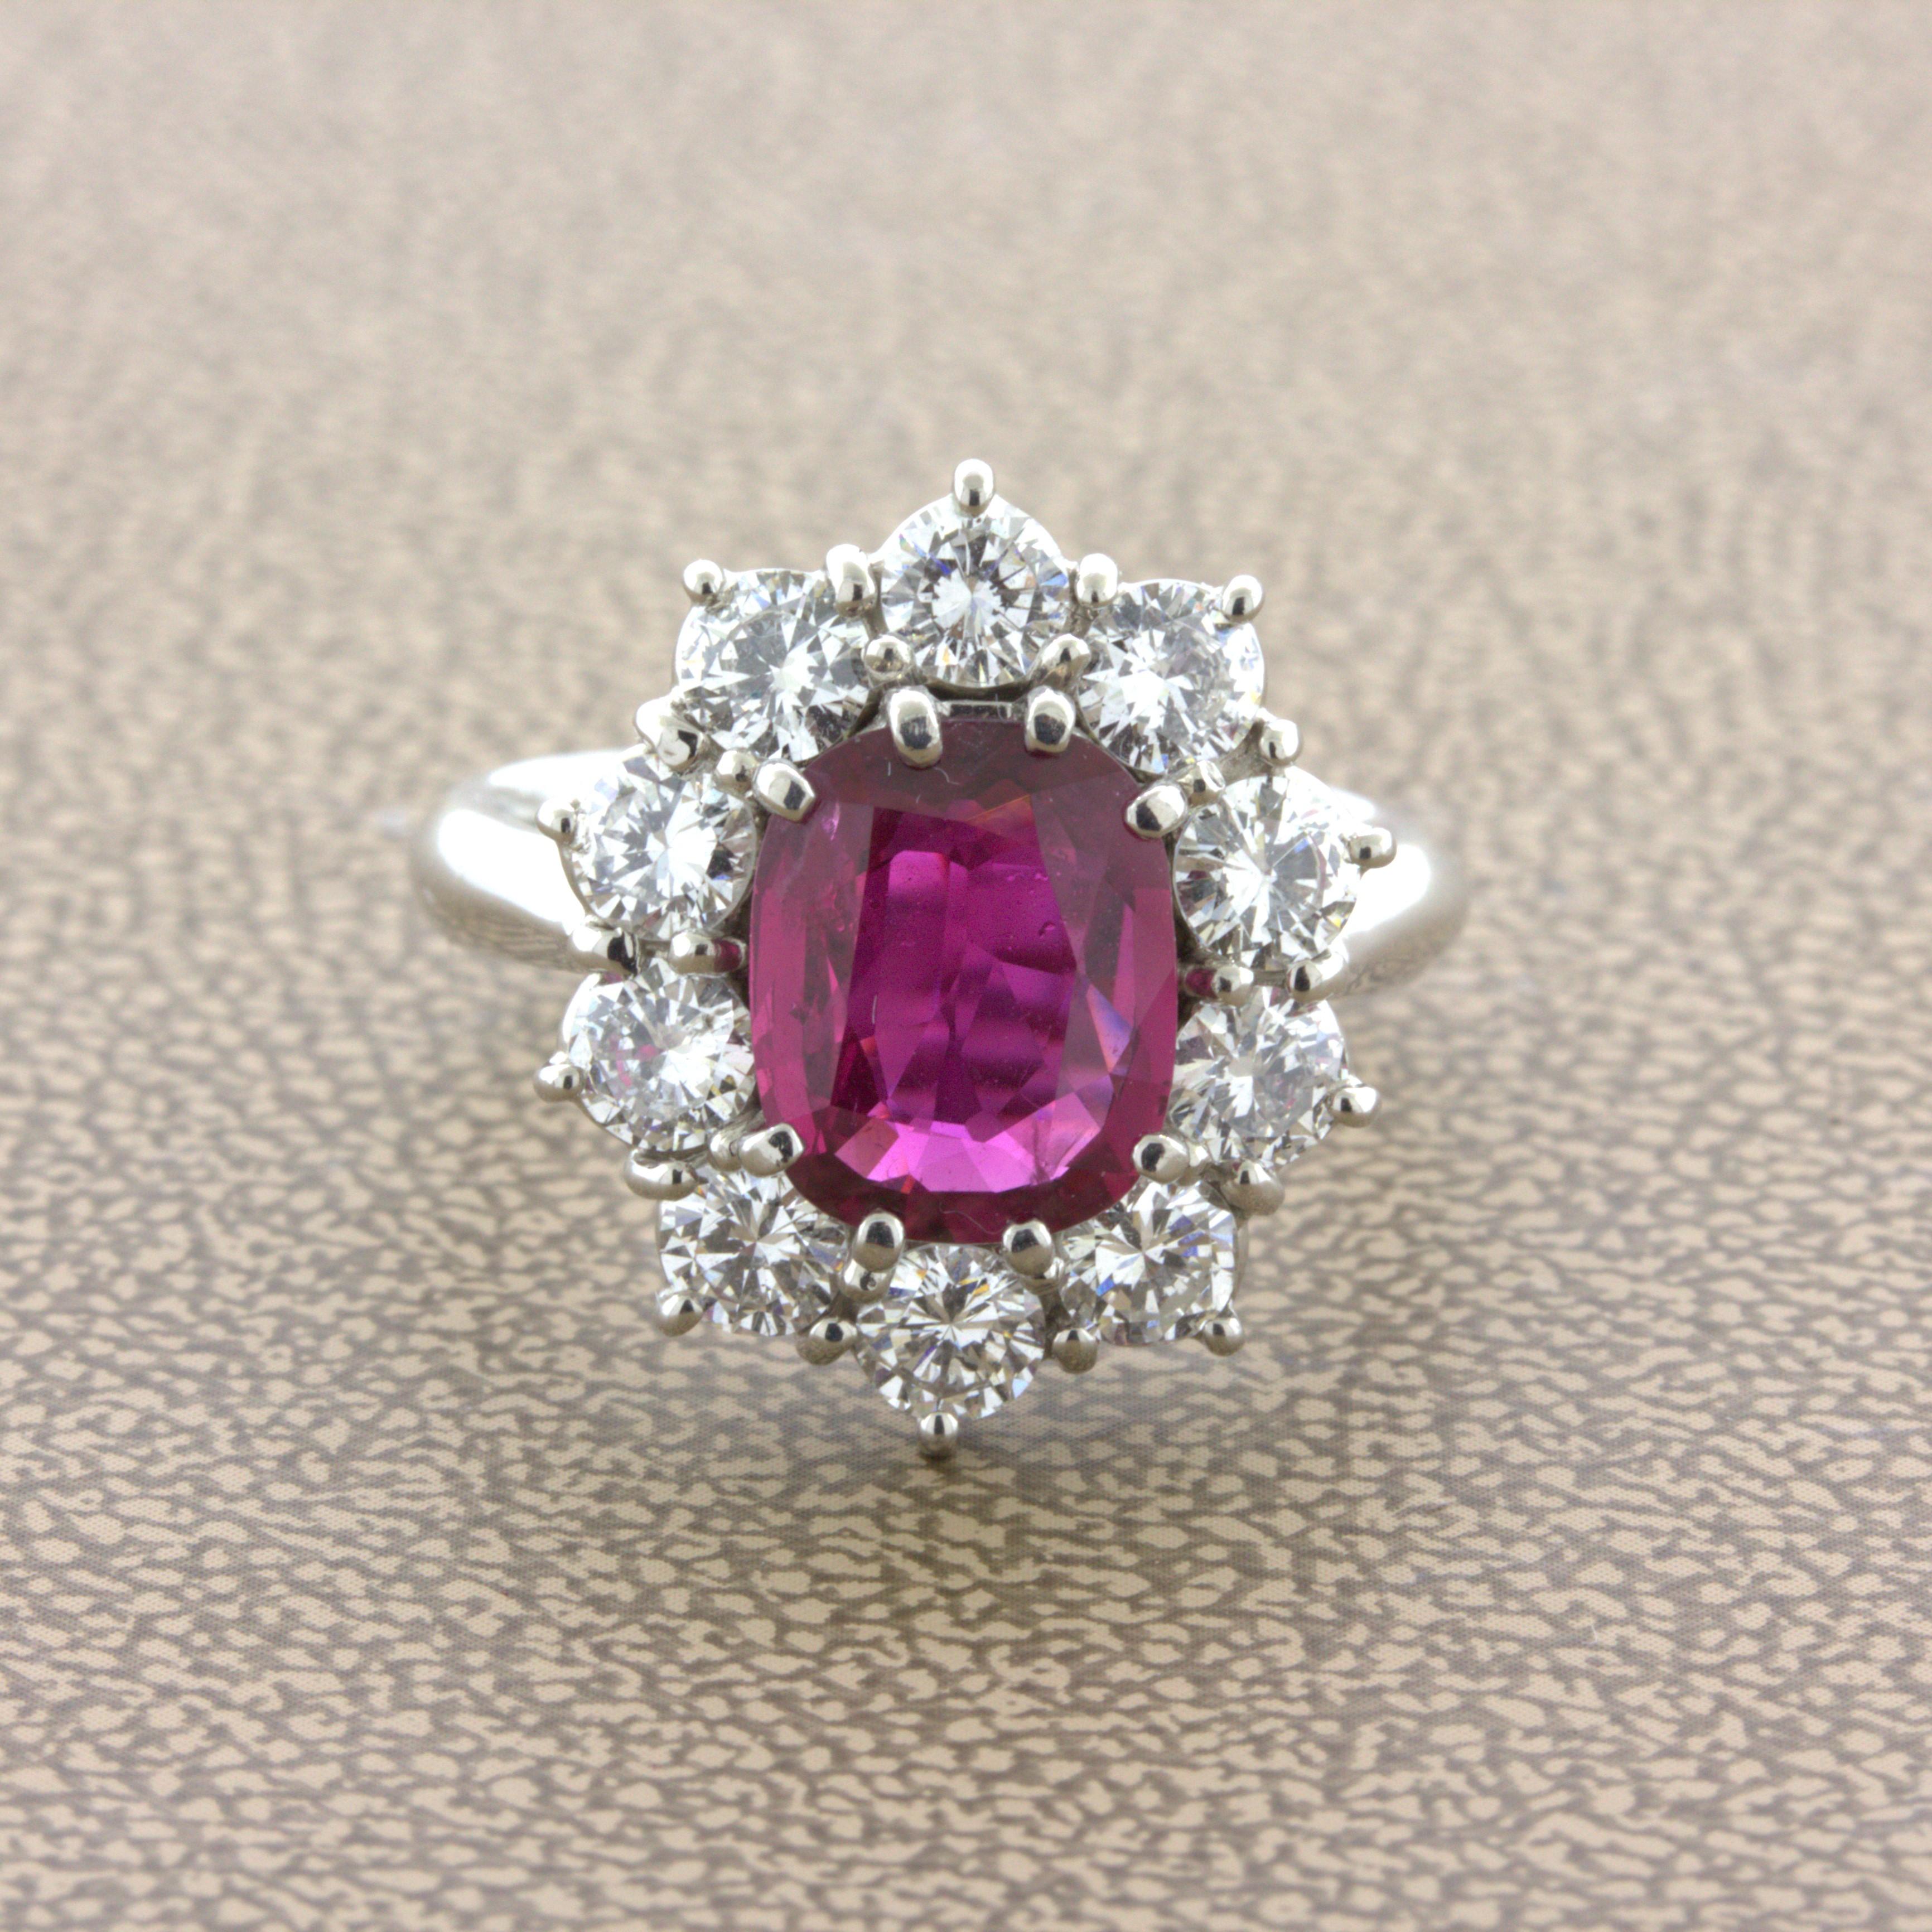 A lovely ruby ring designed in the same manner as Princess Diana’s famous sapphire engagement ring. This piece features a very fine 2.58 carat ruby which has been certified by the GIA as natural with a Thai origin. Adding to that, the ruby has a